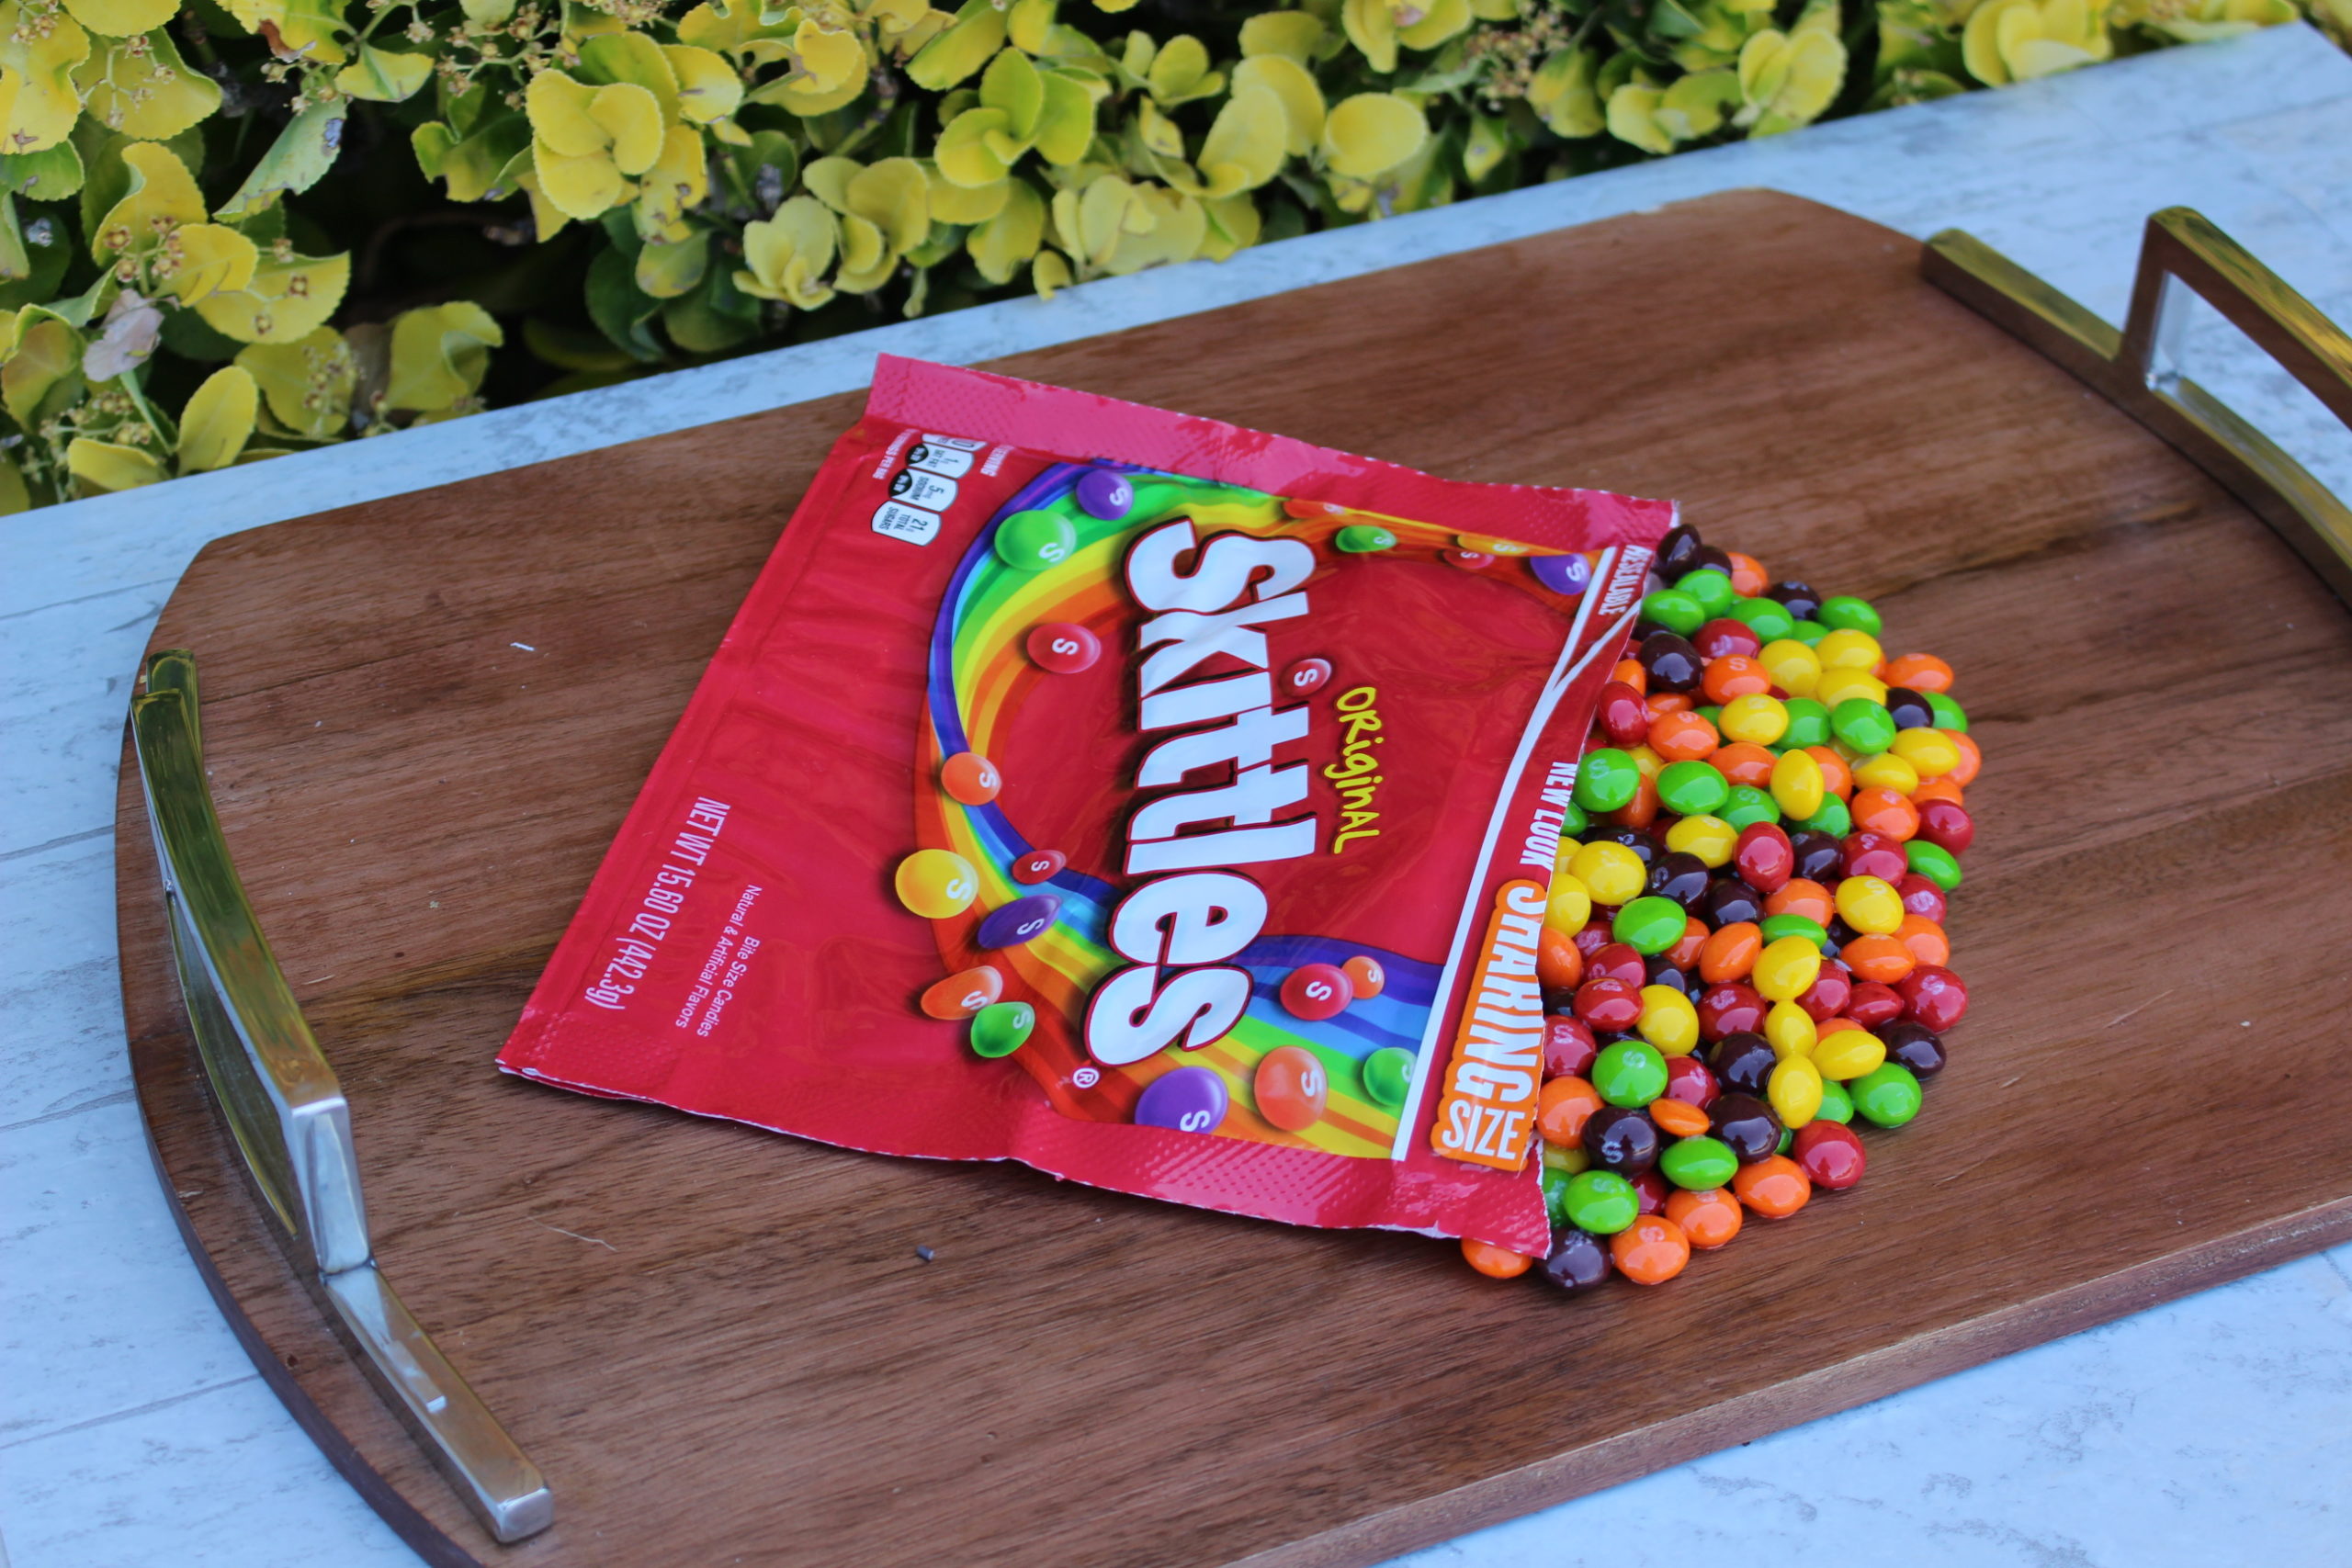 You Can Get a 3-Pound Bag of Skittles on Amazon for Under $12